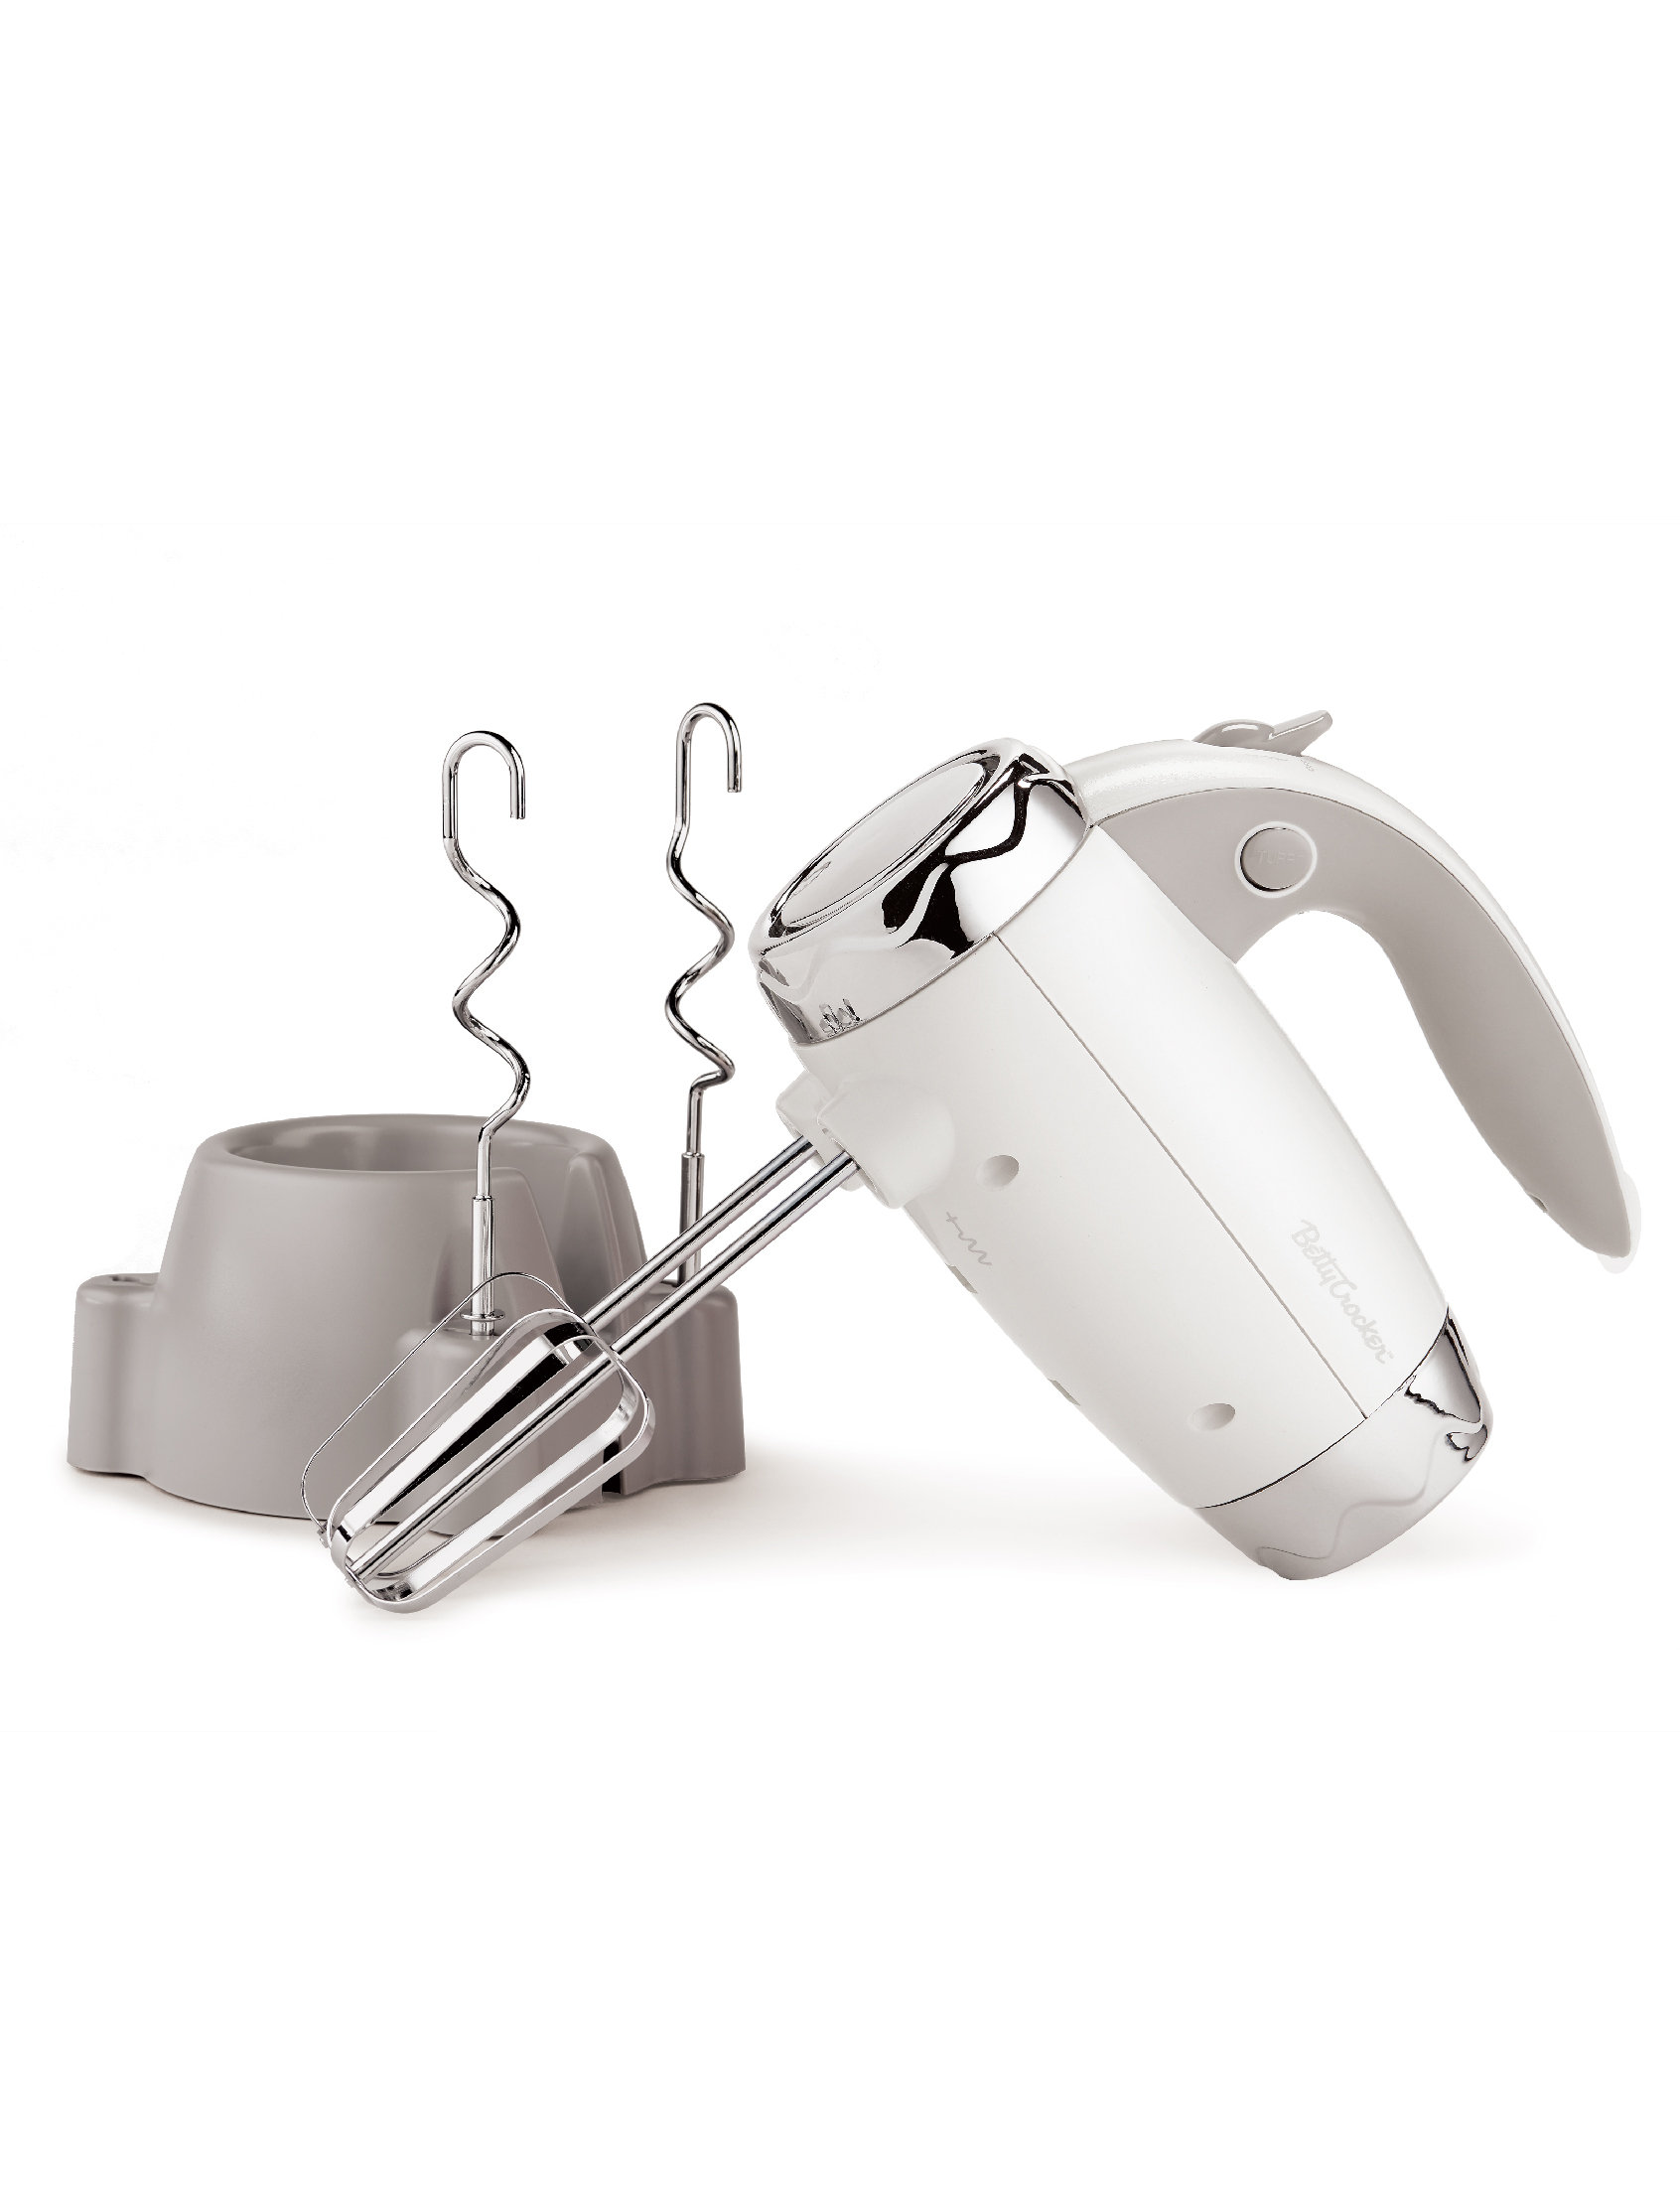 Tasty by Cuisinart Electric Home Kitchen Handheld Food Mixer with Beaters 